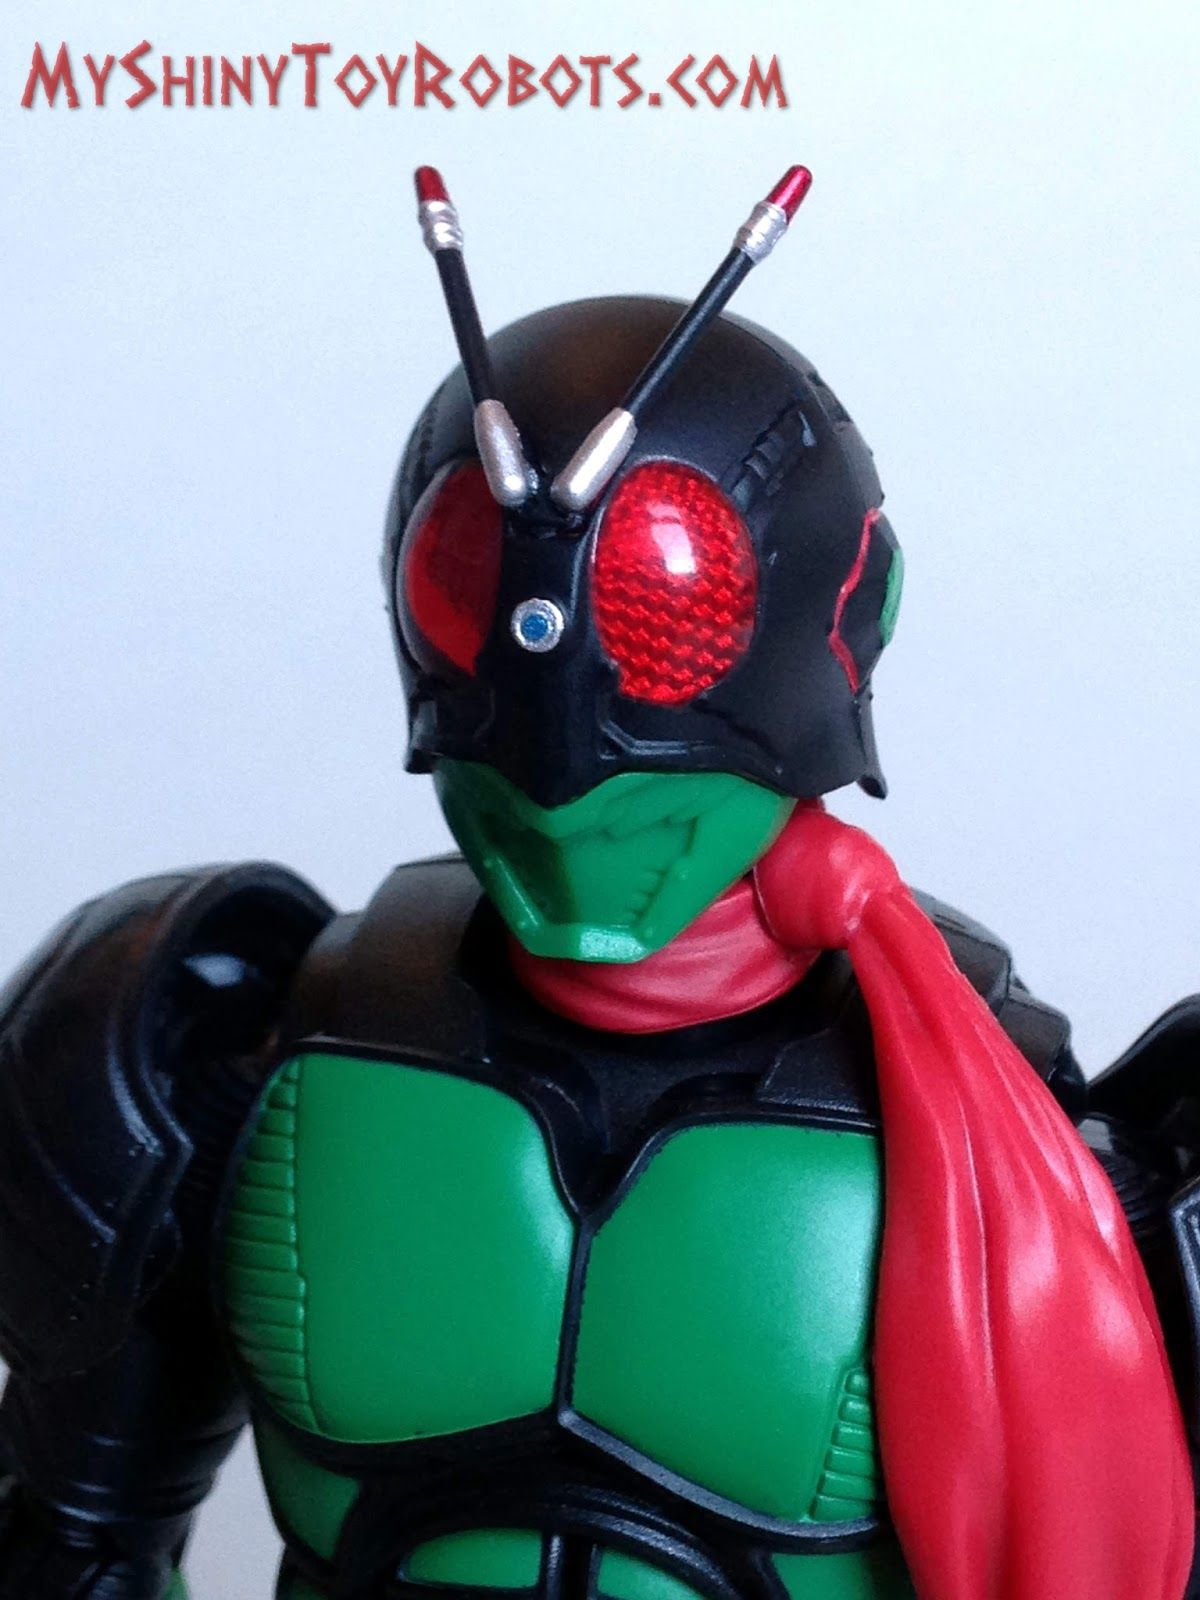 My Shiny Toy Robots: Toybox REVIEW: S.H. Figuarts Kamen Rider 1 [2016]